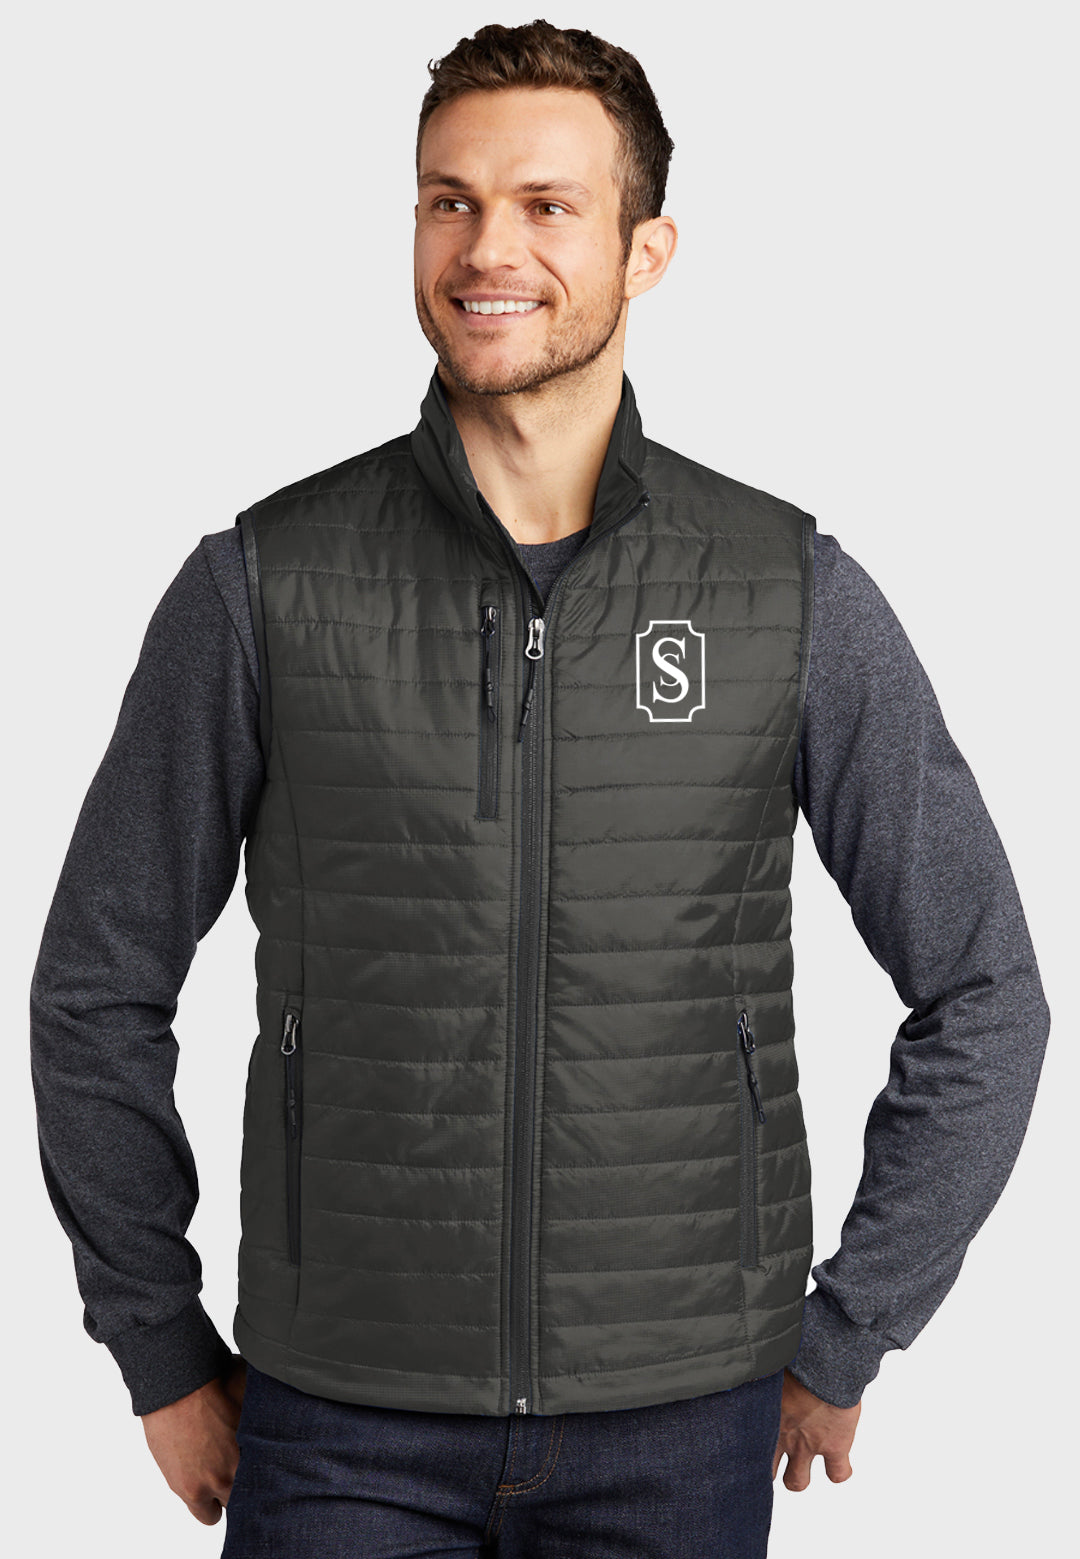 Segars Stables Port Authority® Packable Puffy Vest - Ladies/Mens Styles